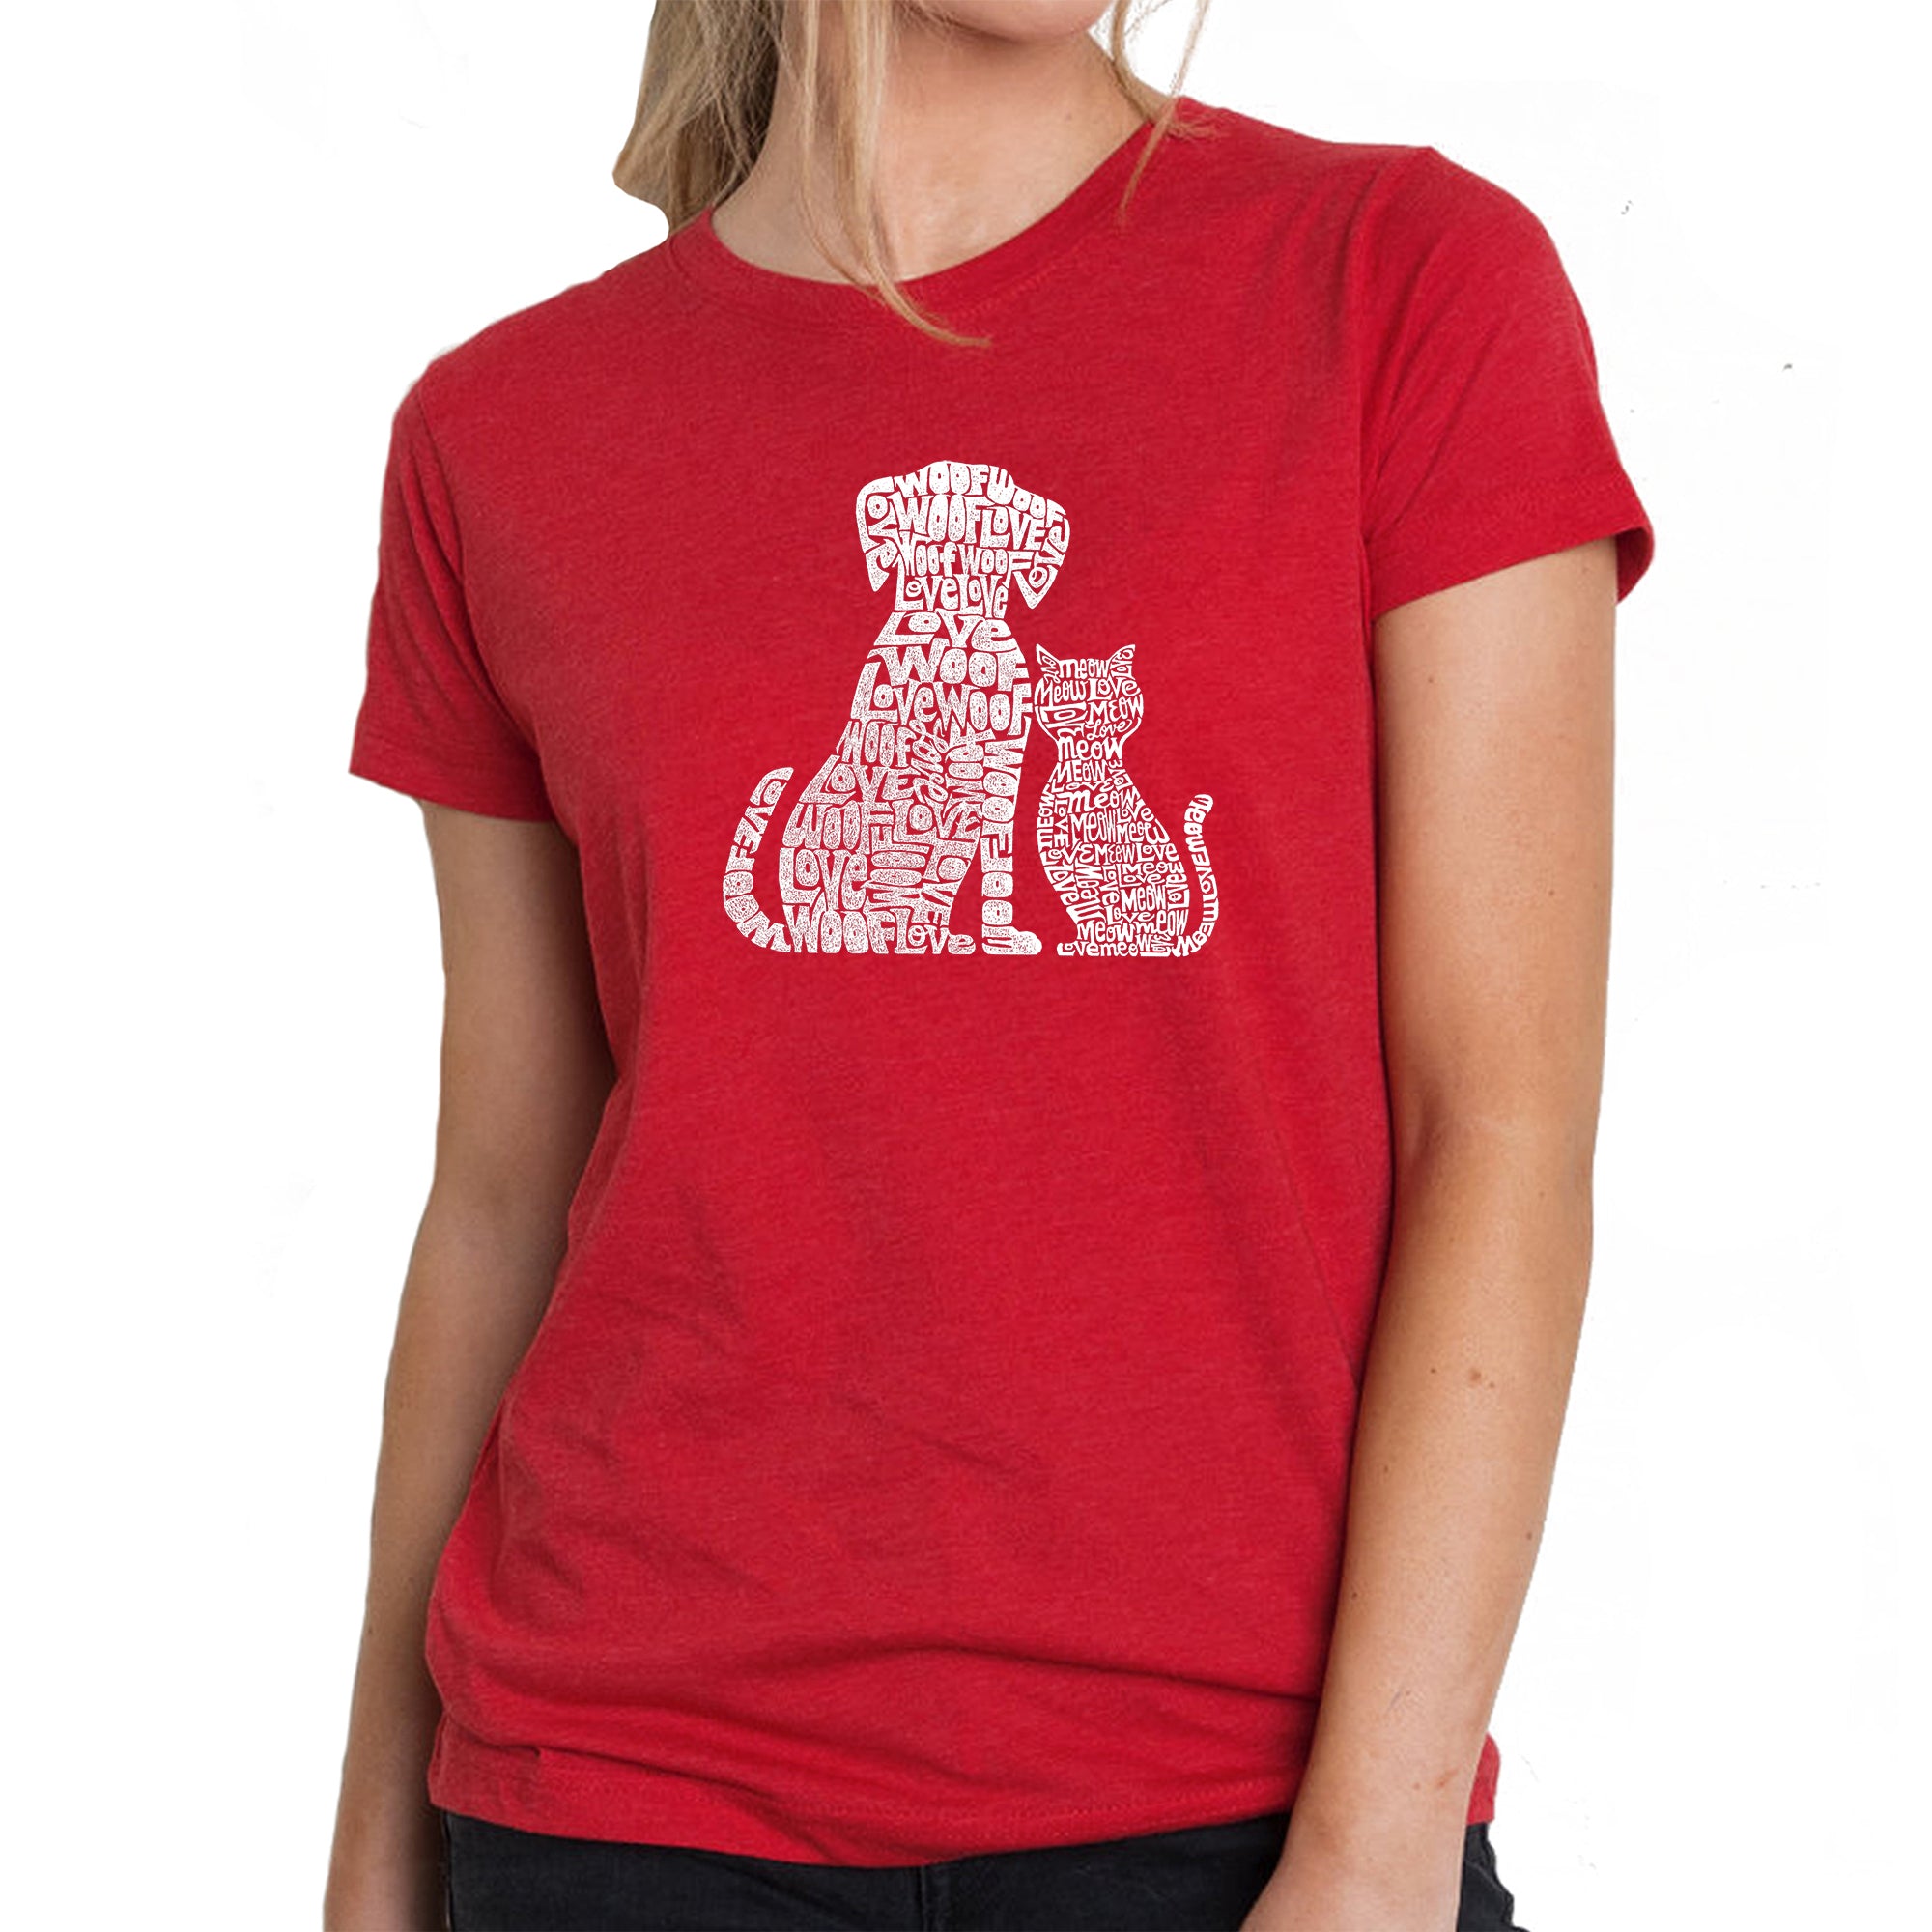 Dogs And Cats - Women's Premium Blend Word Art T-Shirt - Red - X-Large